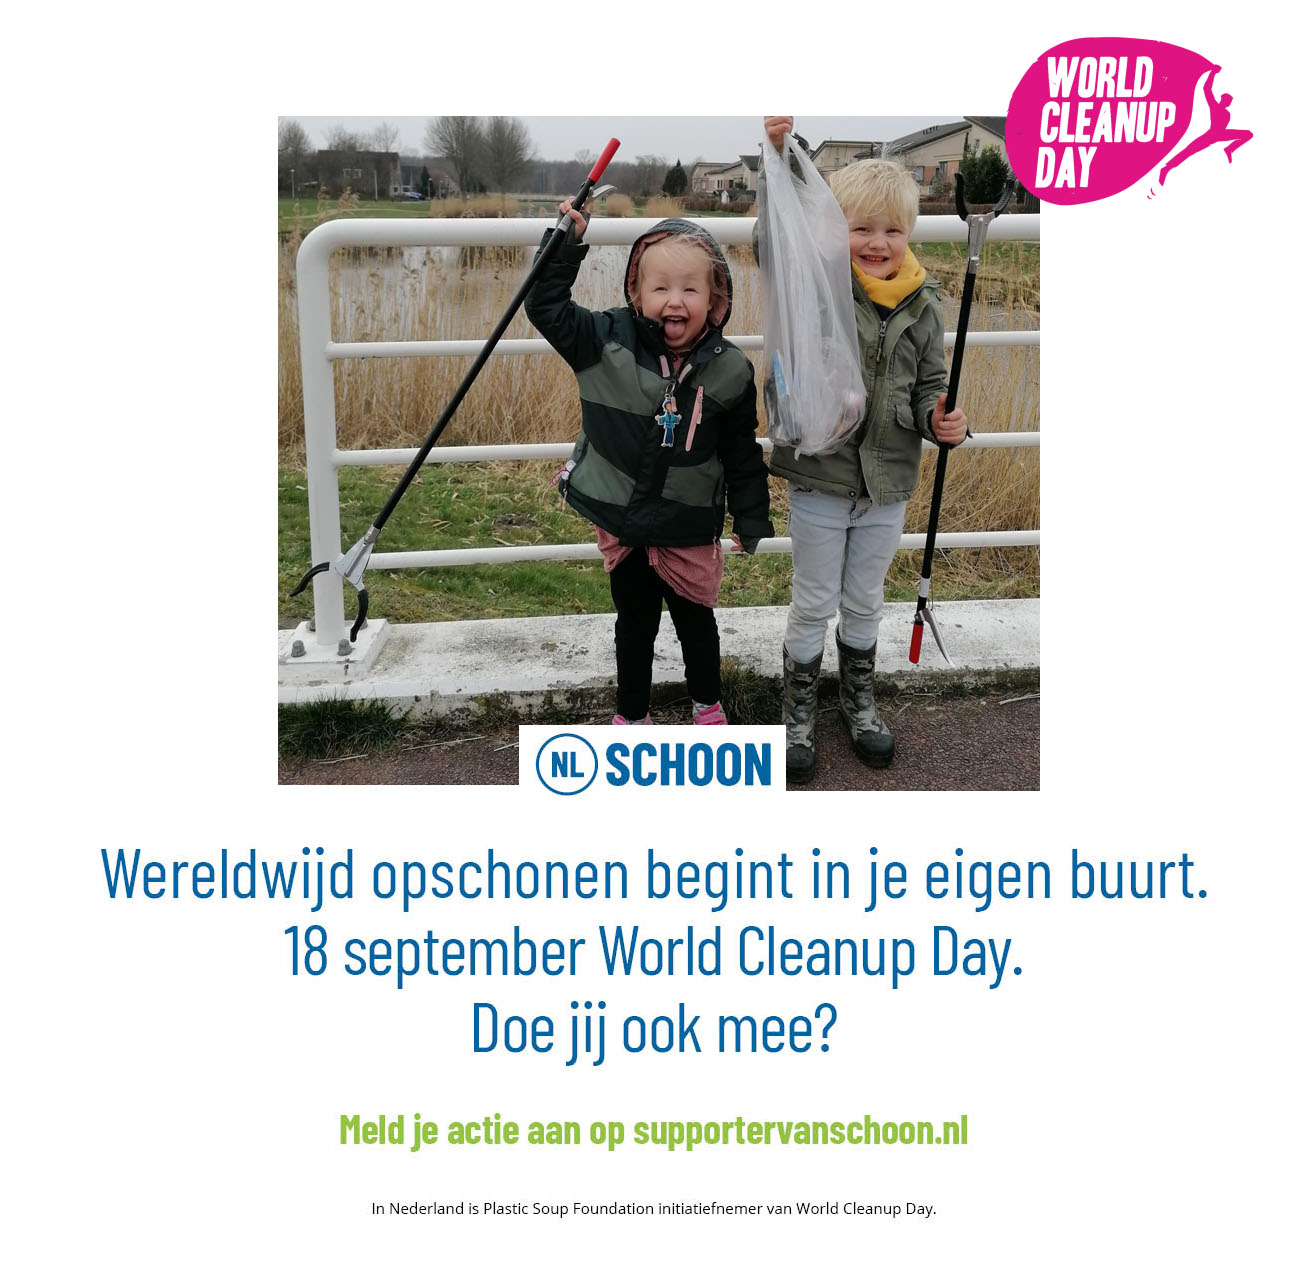 18 september: World Cleanup Day